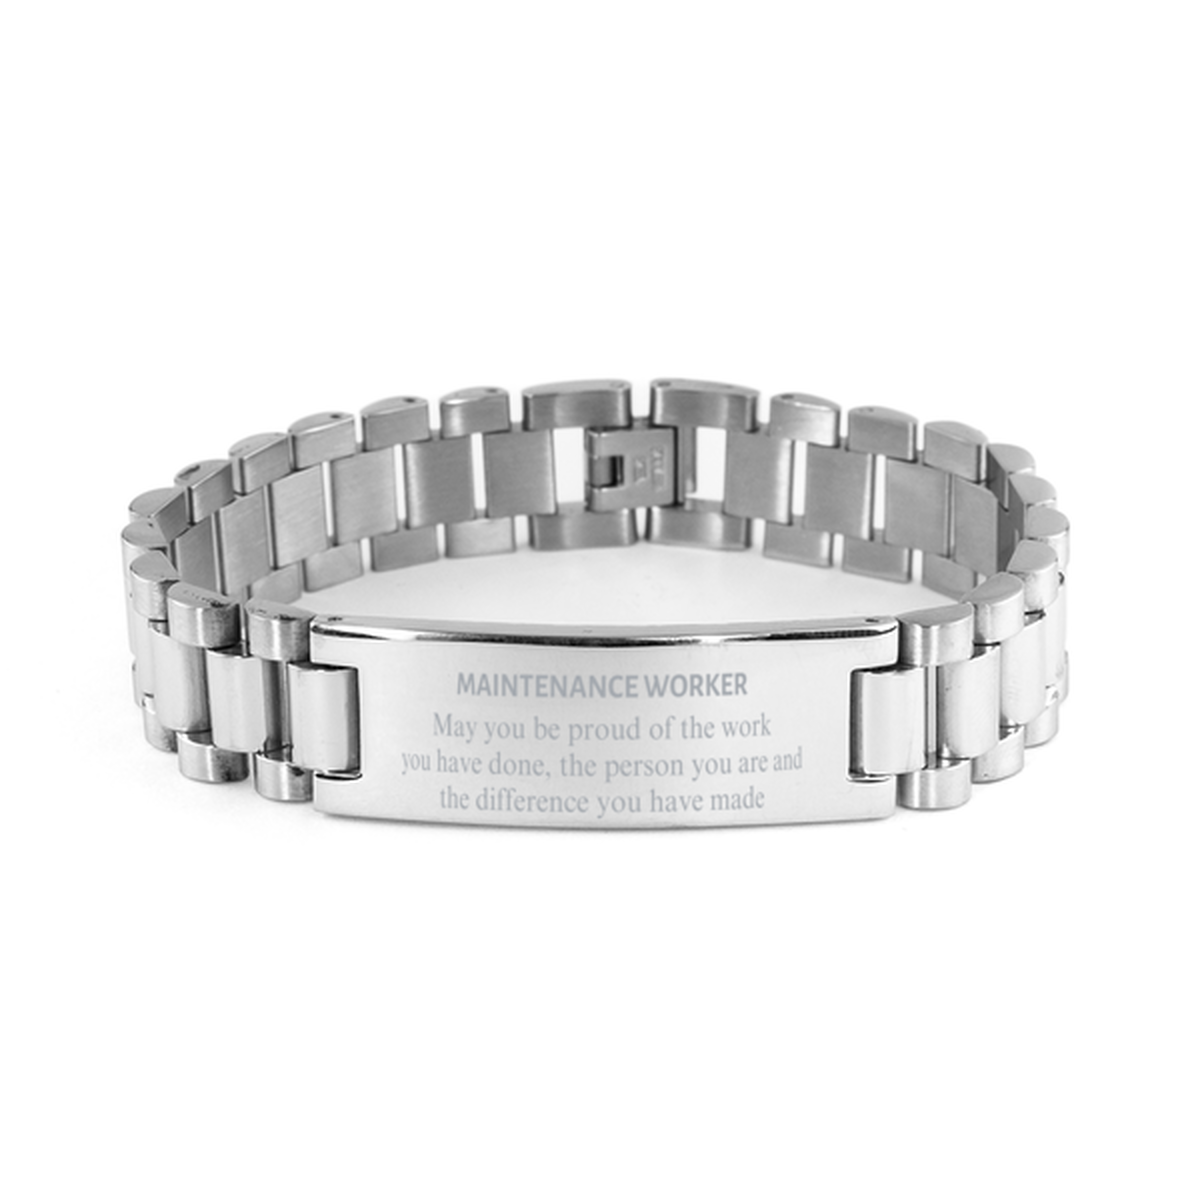 Maintenance Worker May you be proud of the work you have done, Retirement Maintenance Worker Ladder Stainless Steel Bracelet for Colleague Appreciation Gifts Amazing for Maintenance Worker